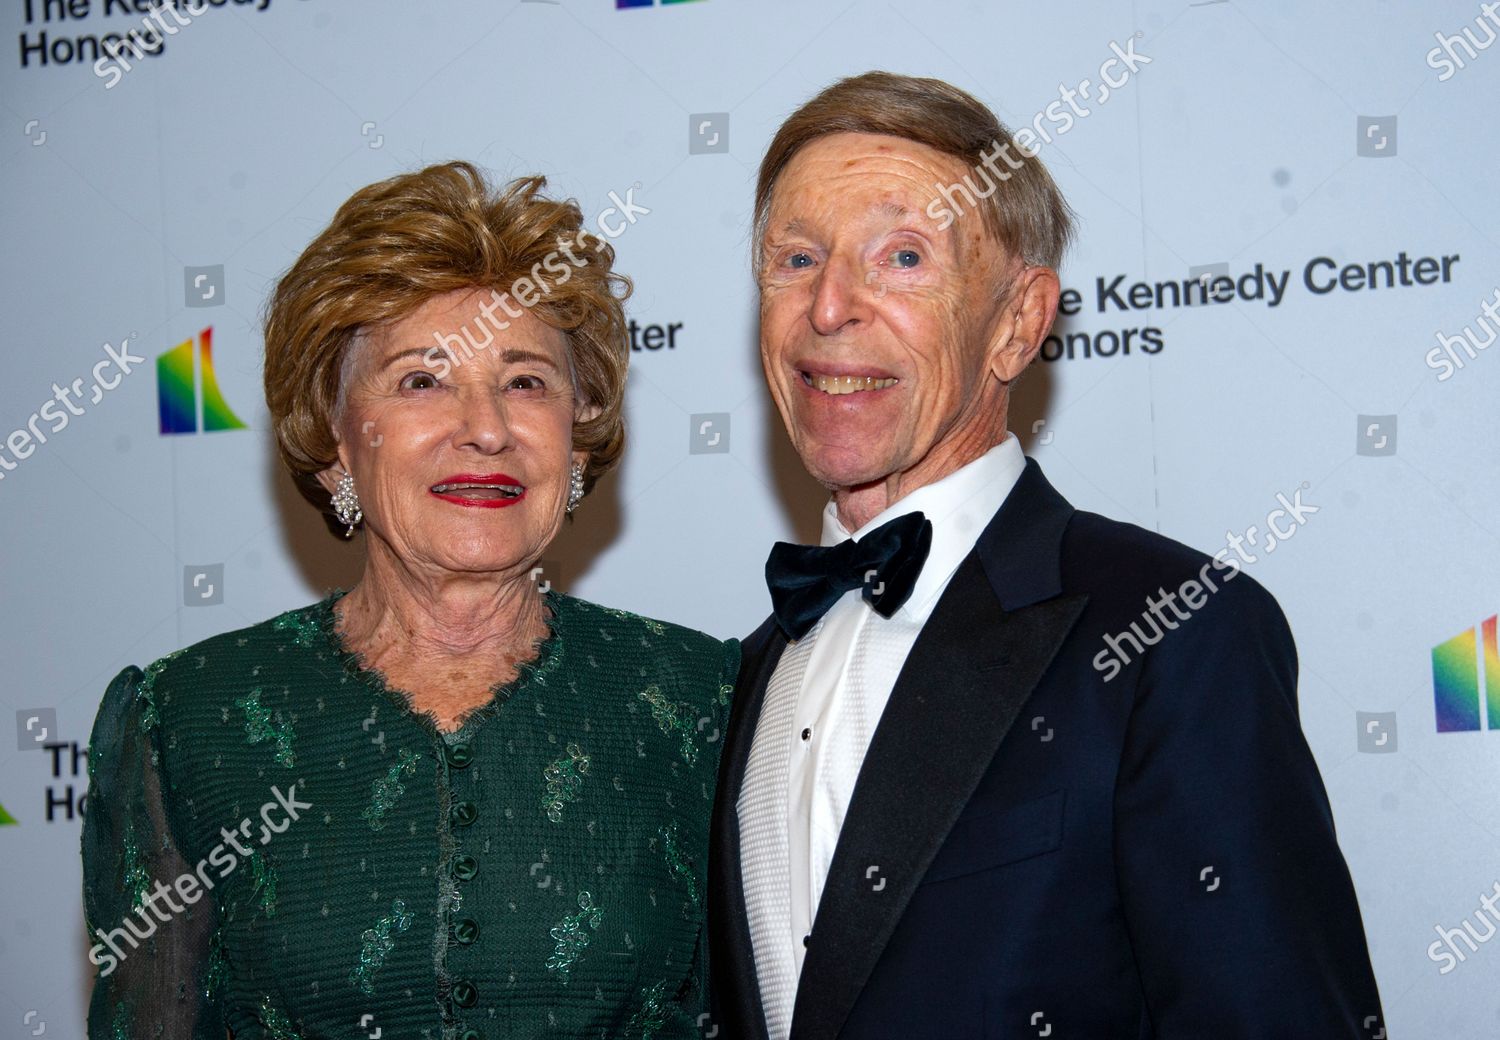 Morton Funger His Wife Norma Lee Editorial Stock Photo - Stock Image |  Shutterstock